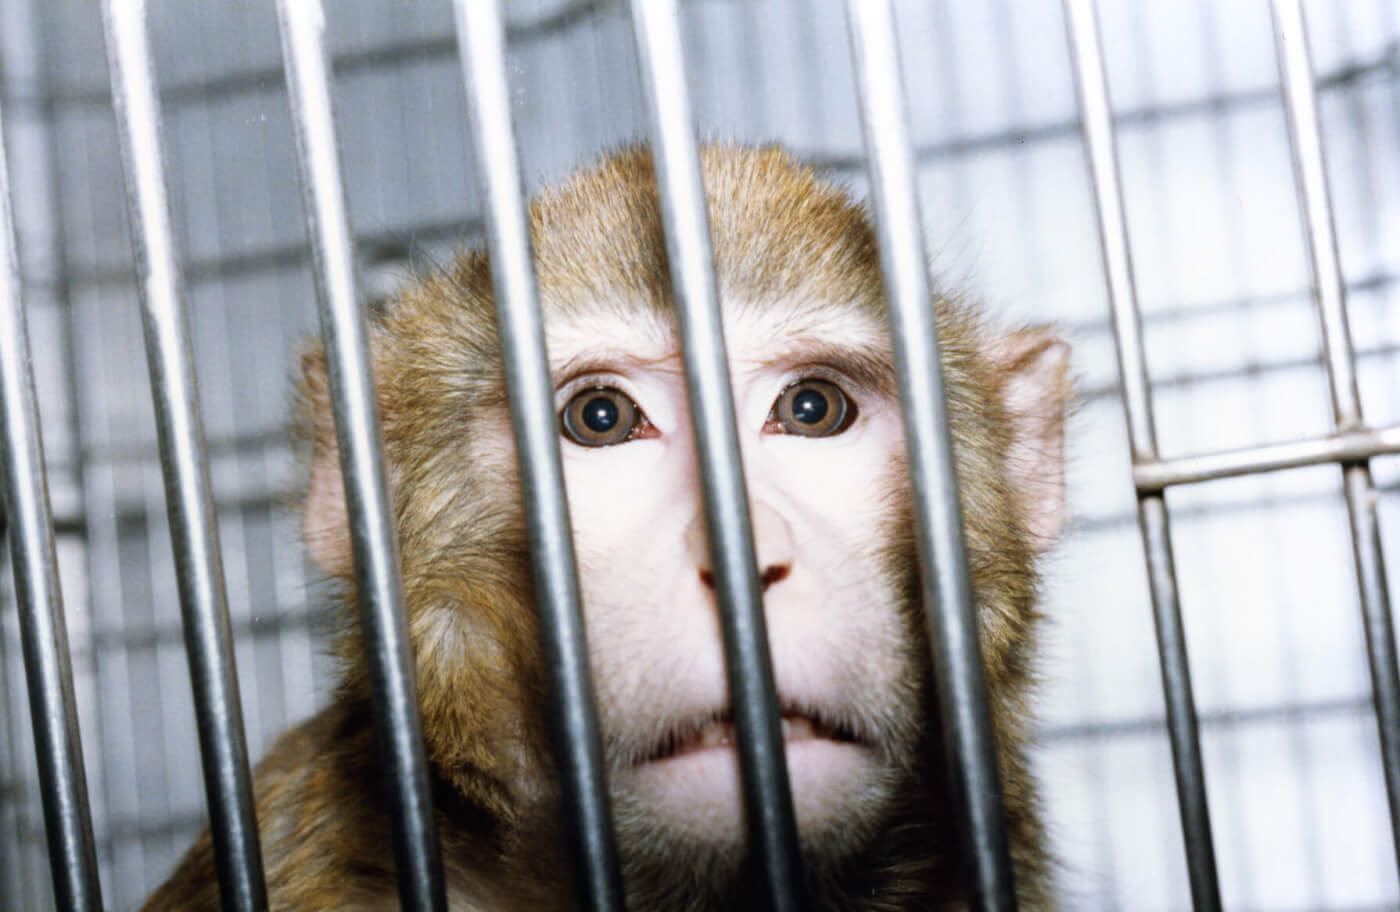 sad monkey 4 Are There Any Benefits to Animal Testing? Get the Facts